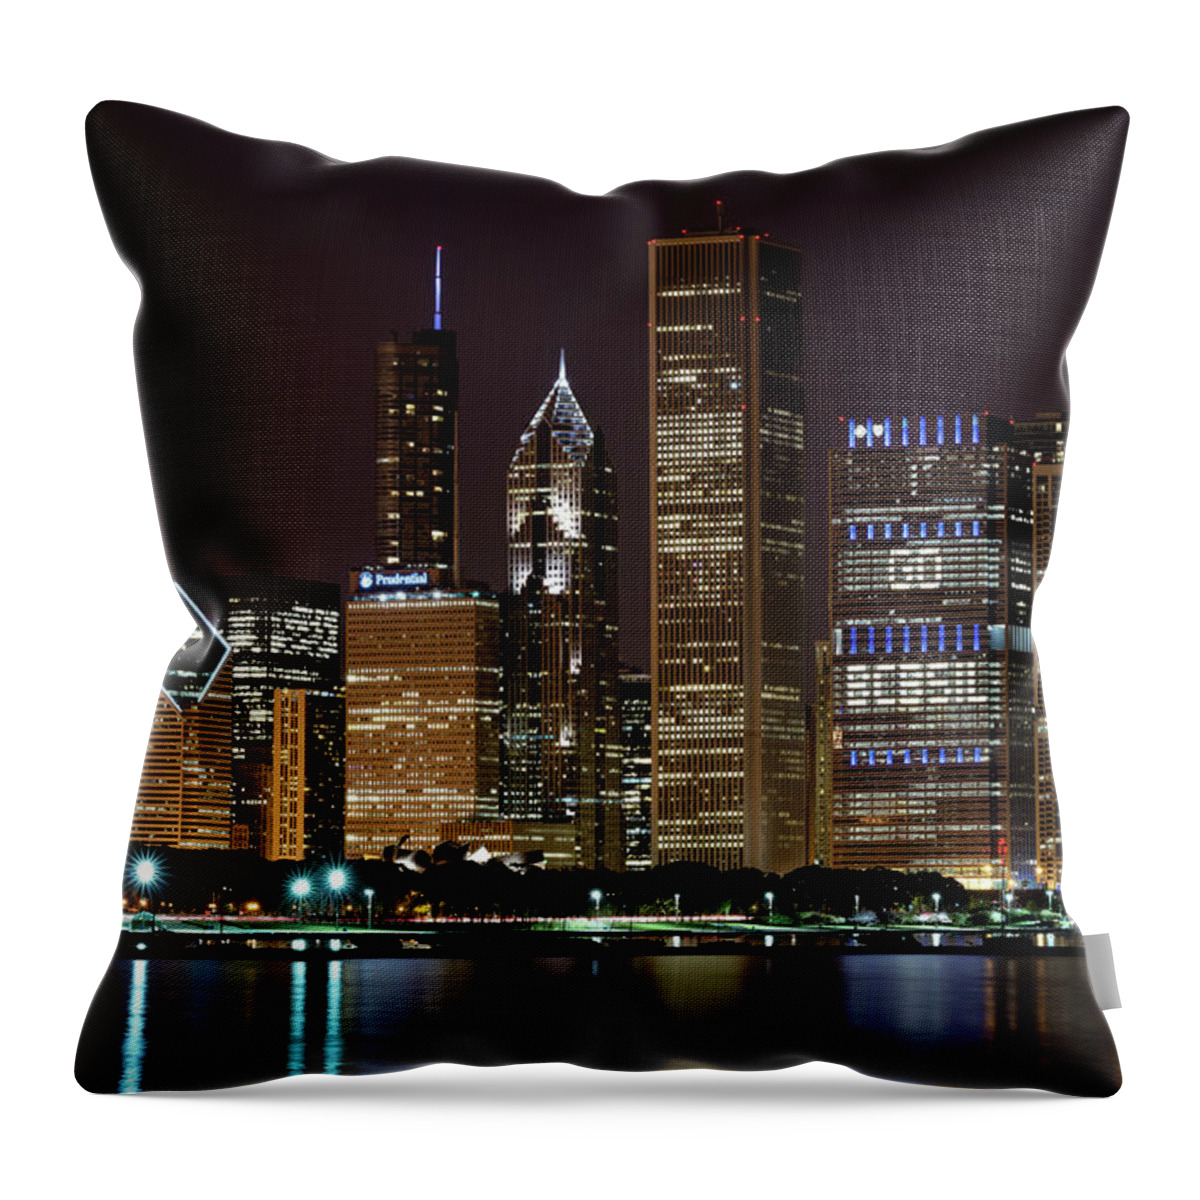 Chicago Throw Pillow featuring the photograph Bcbsil by Andrea Silies